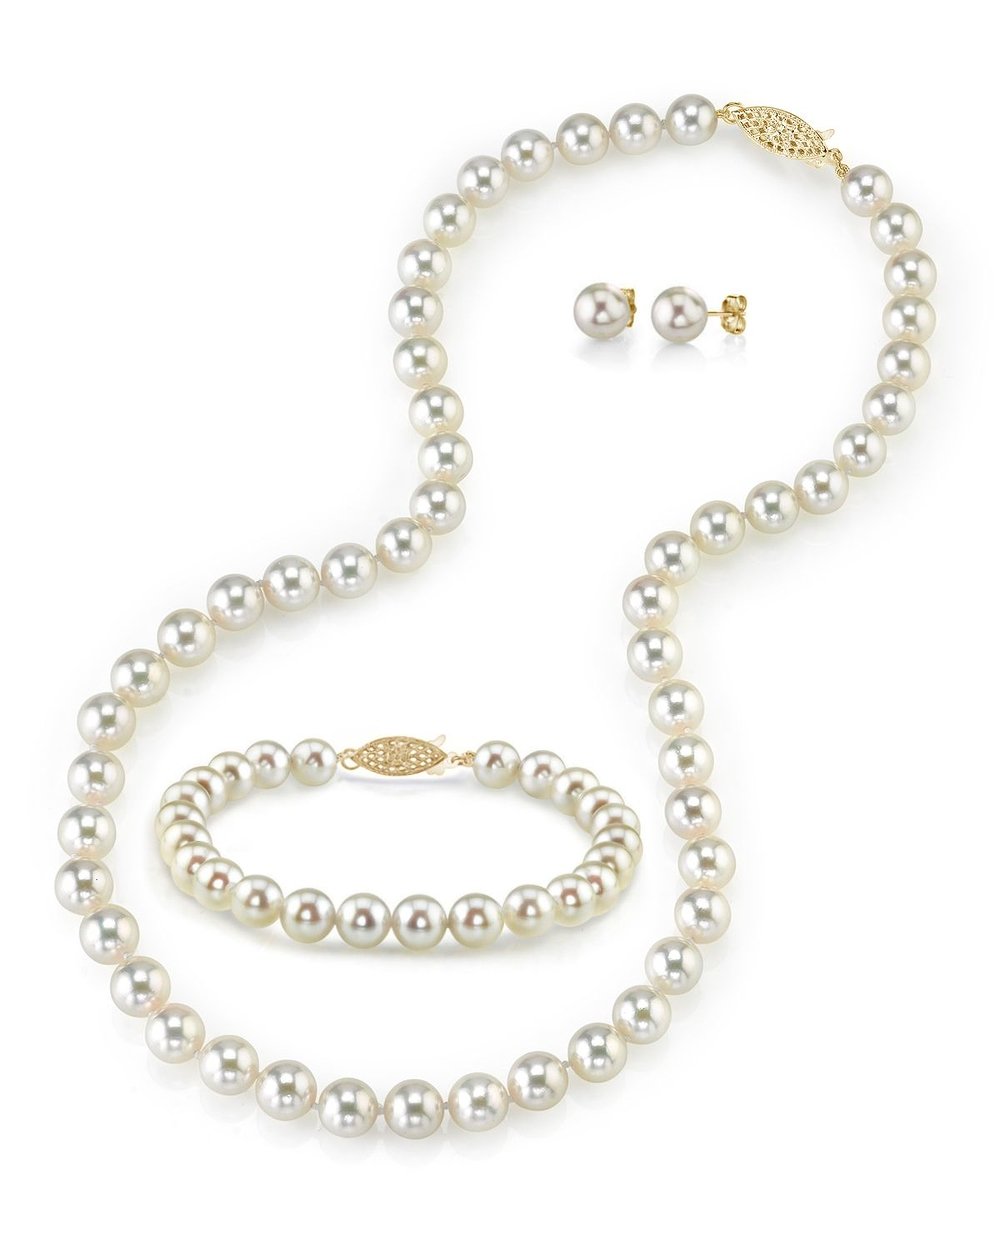 THE PEARL SOURCE 14K Gold 7.5-8mm Round White Pearl Necklace